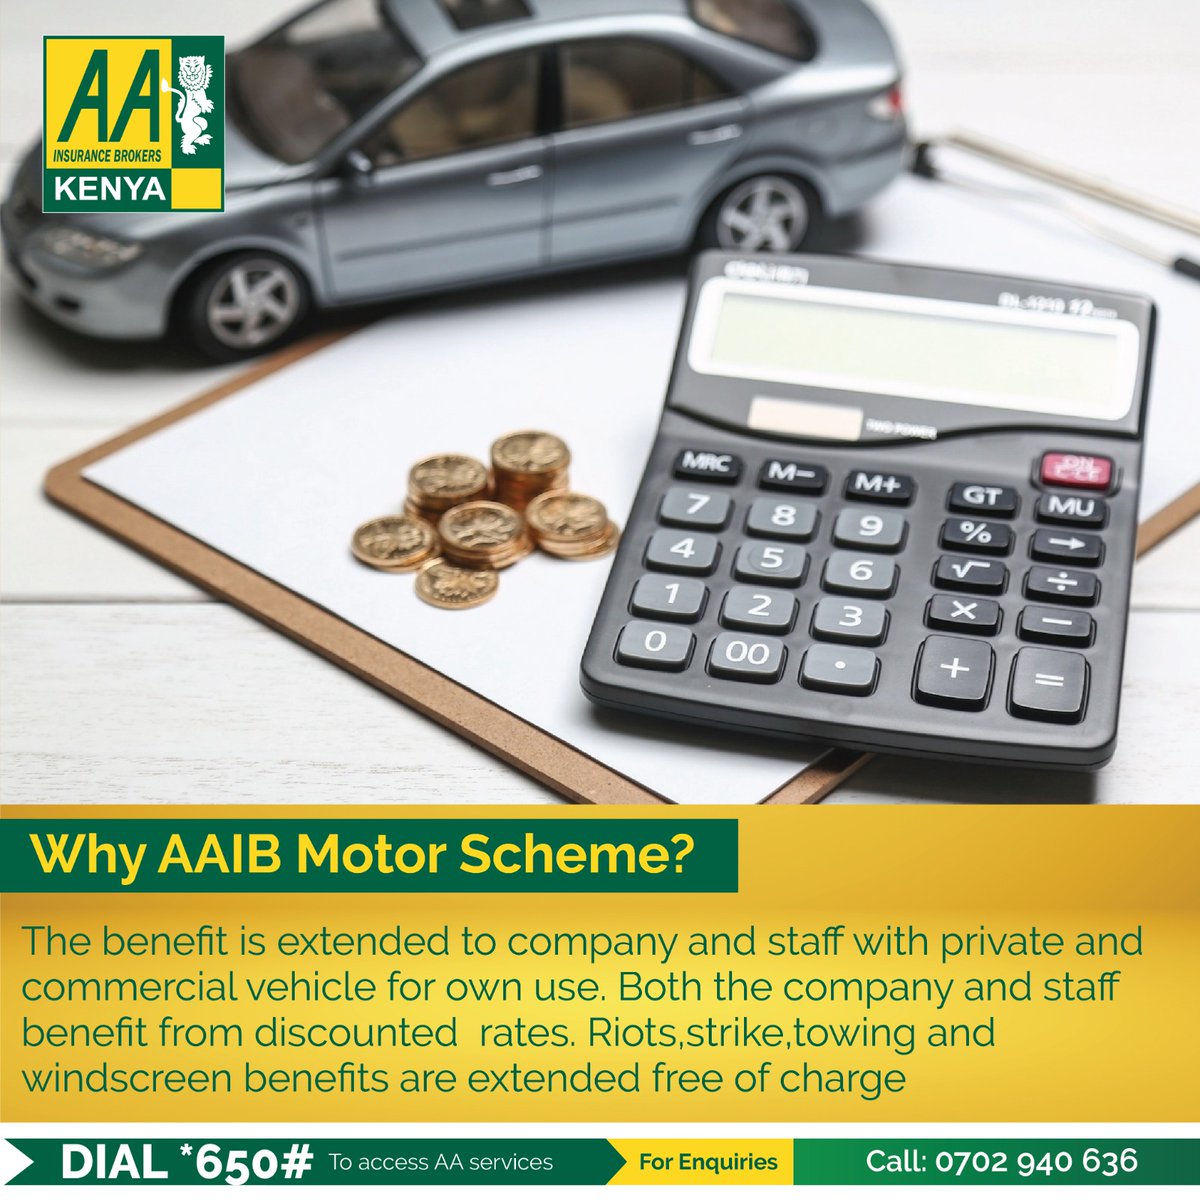 AAIB Motor Scheme benefits both companies and individuals with discounted rates and free coverage for riots, strikes, towing, and windscreen repairs. Choose AA Insurance Brokers for your peace of mind. Call us today on 0720940636
#AAIBCares #MotorScheme